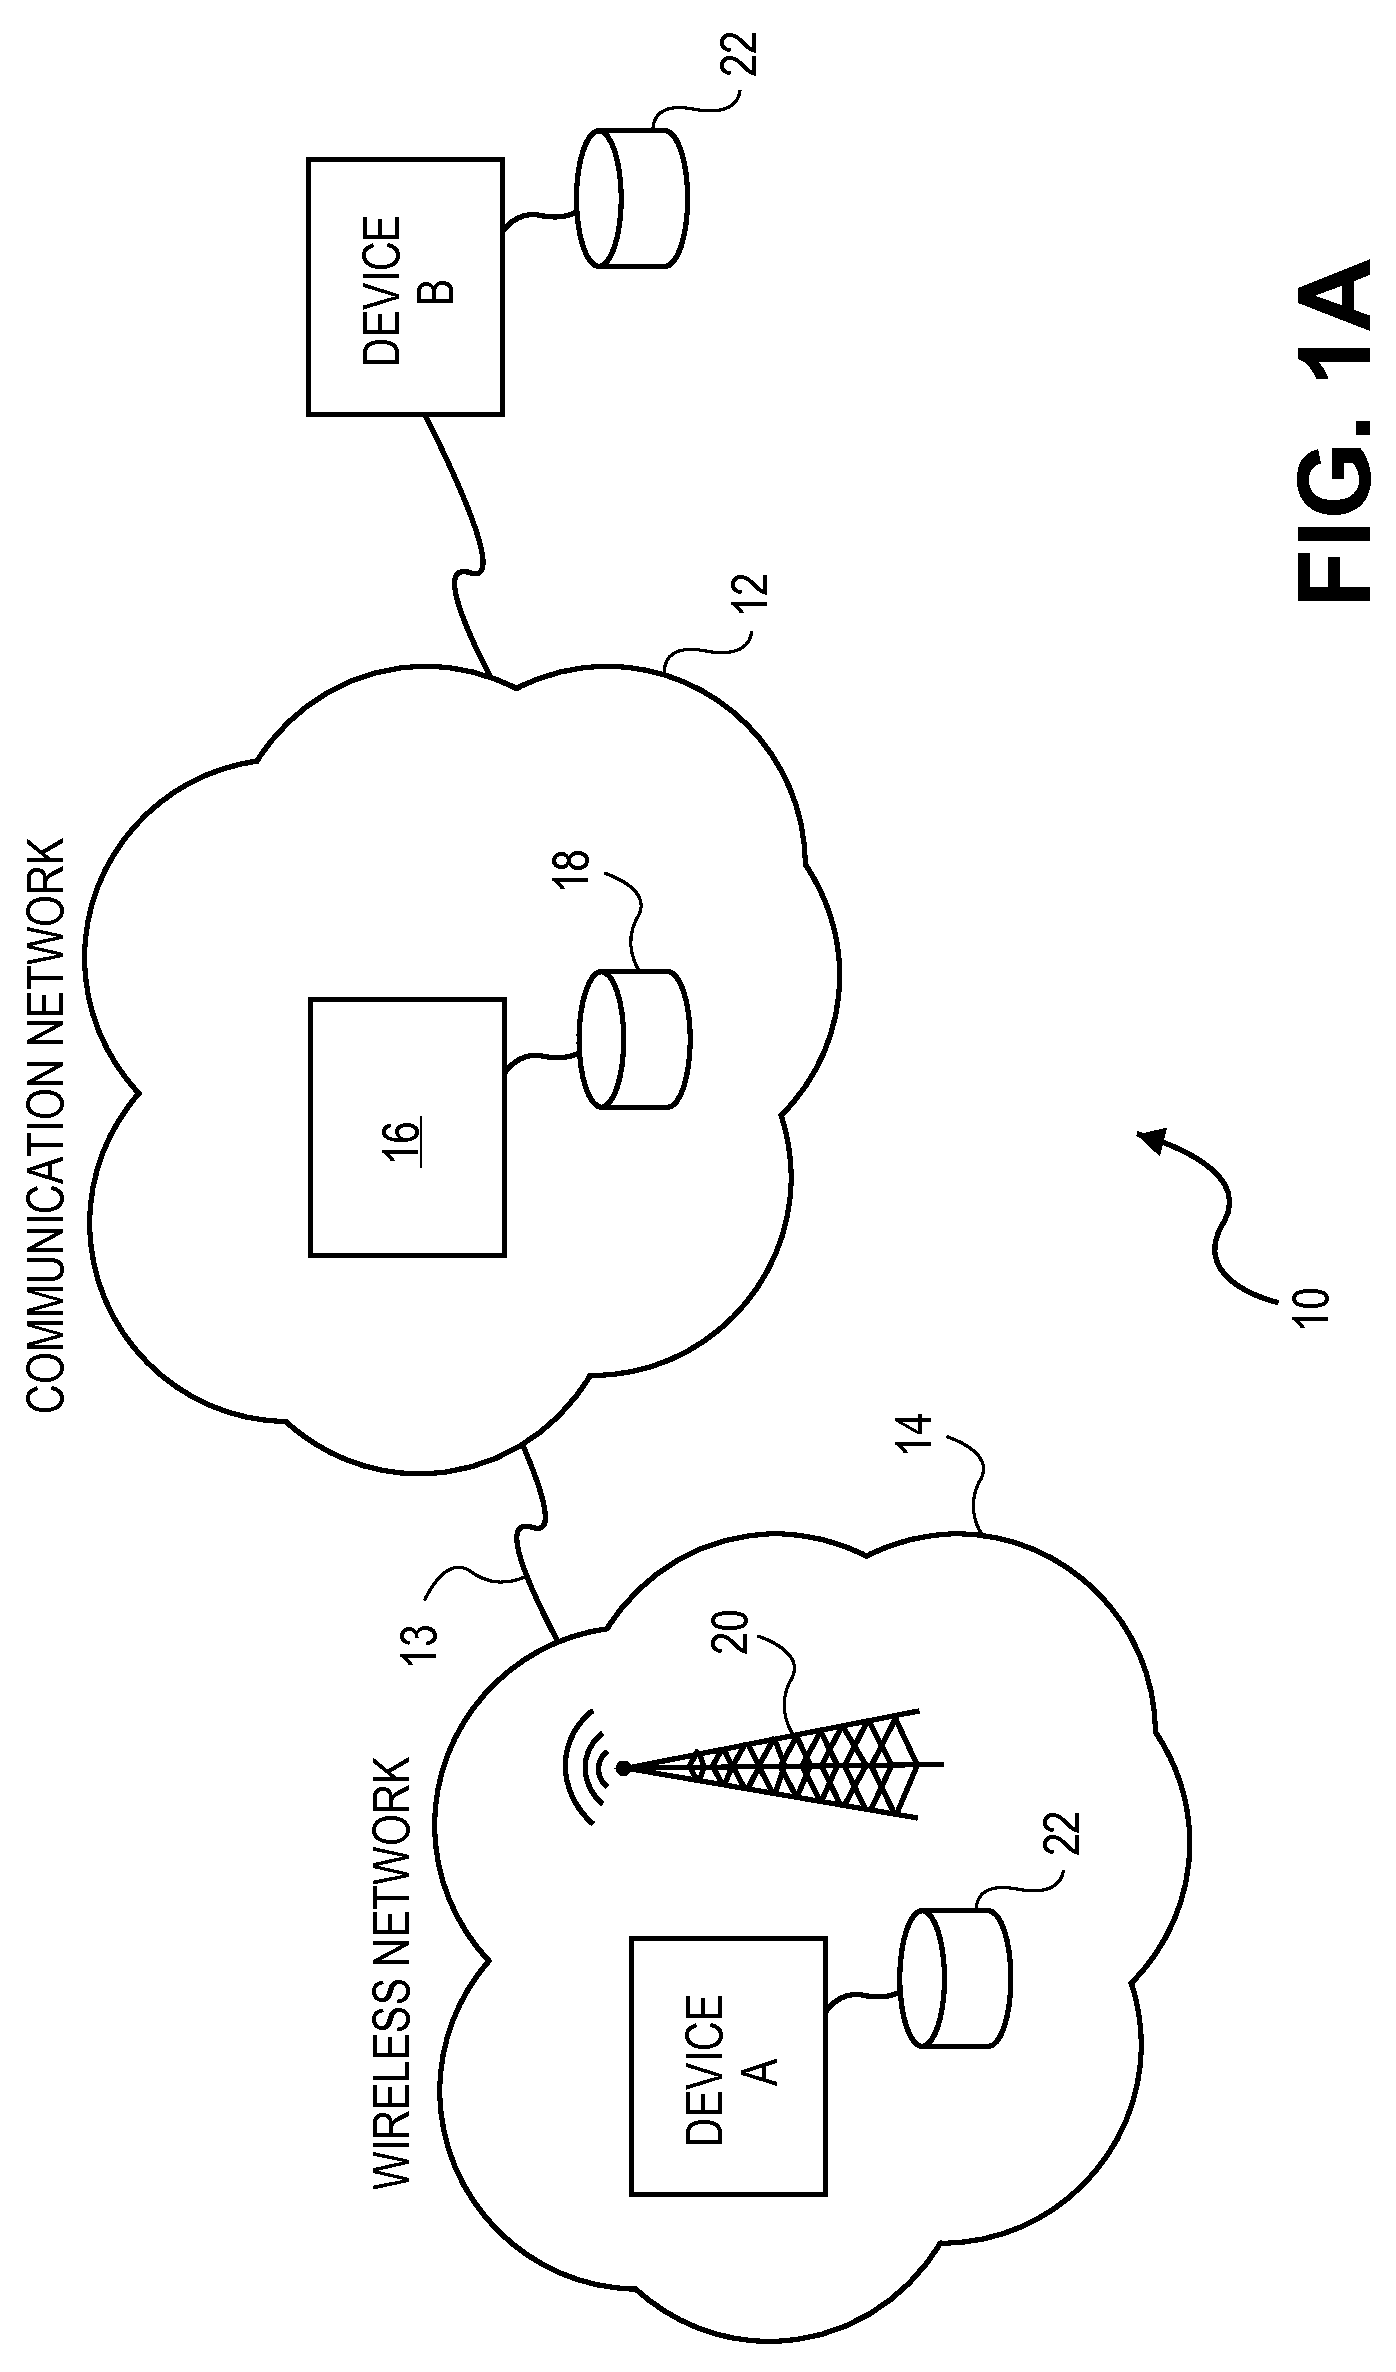 Apparatus and method for enabling communication when network connectivity is reduced or lost during a conversation and for resuming the conversation when connectivity improves